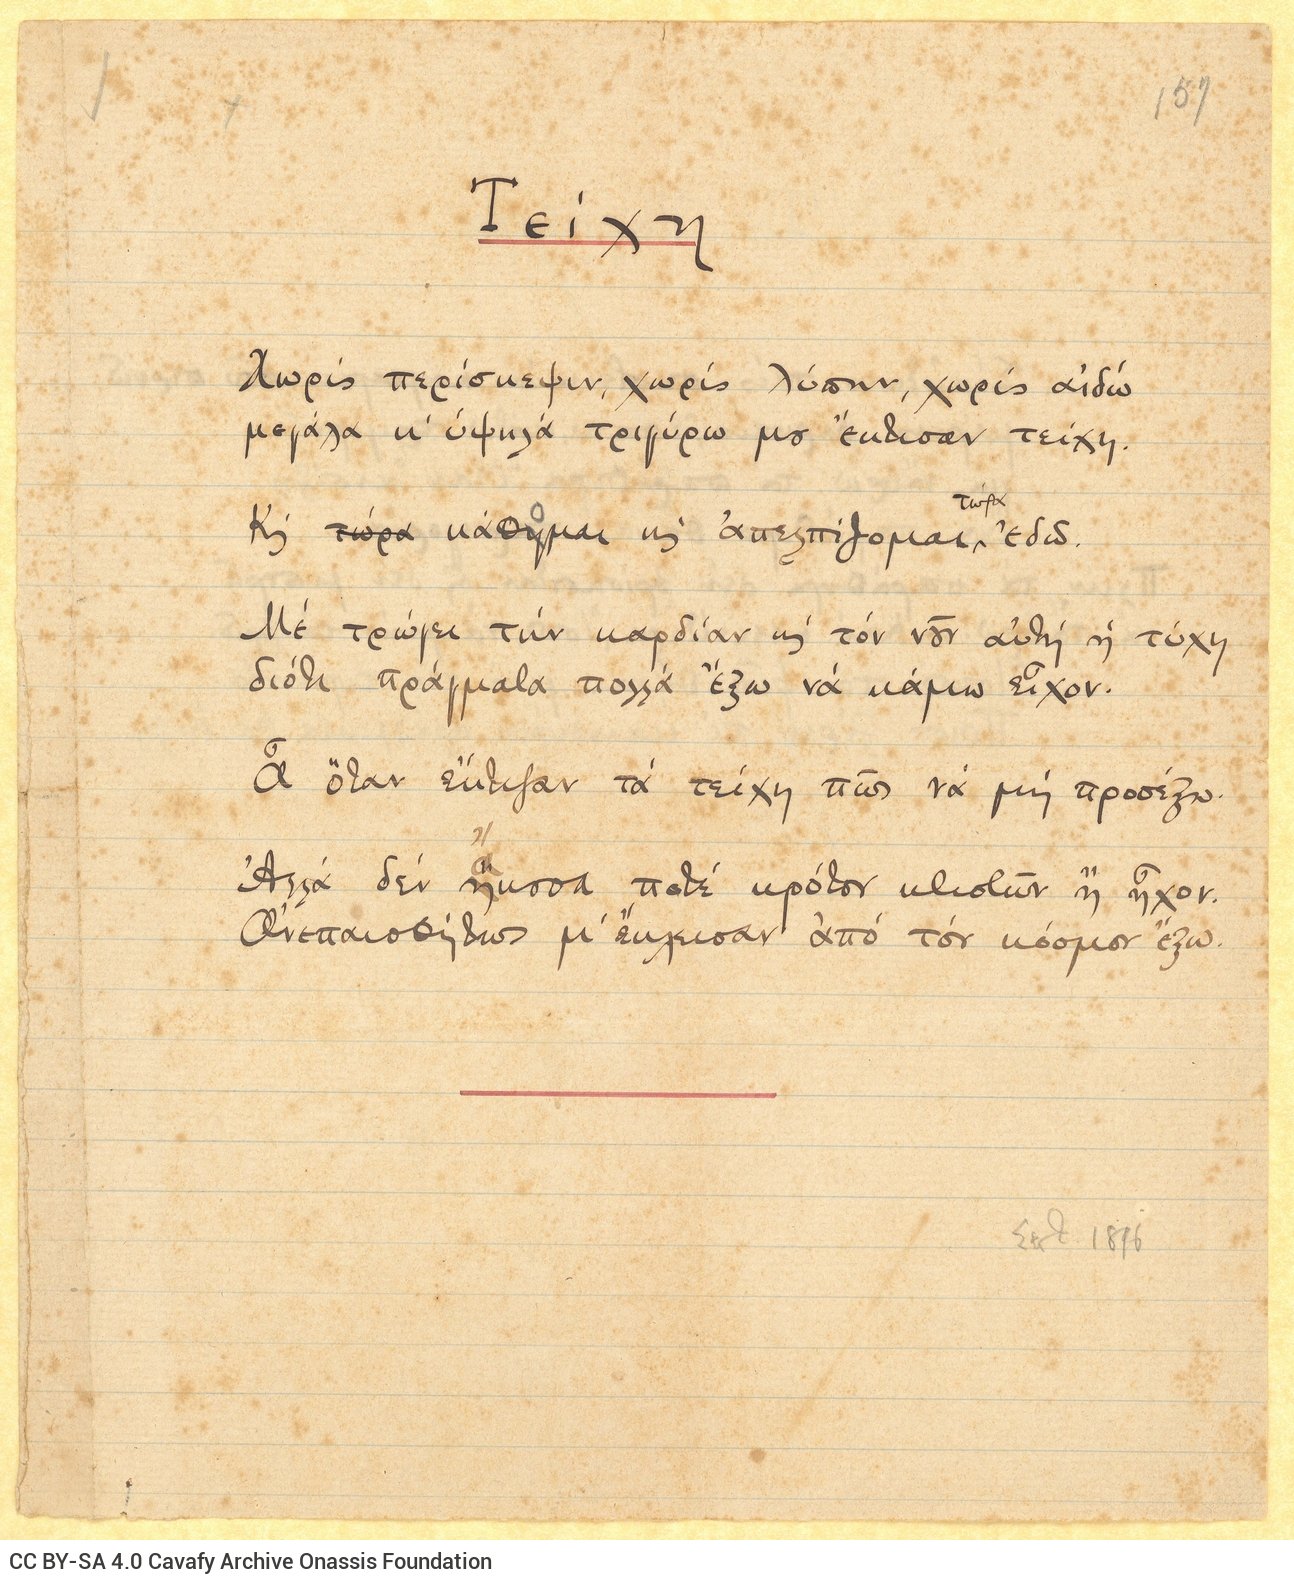 Manuscript of the poem "Walls" on the recto of a ruled sheet. Cancellations and emendations. Number "157" at top right and